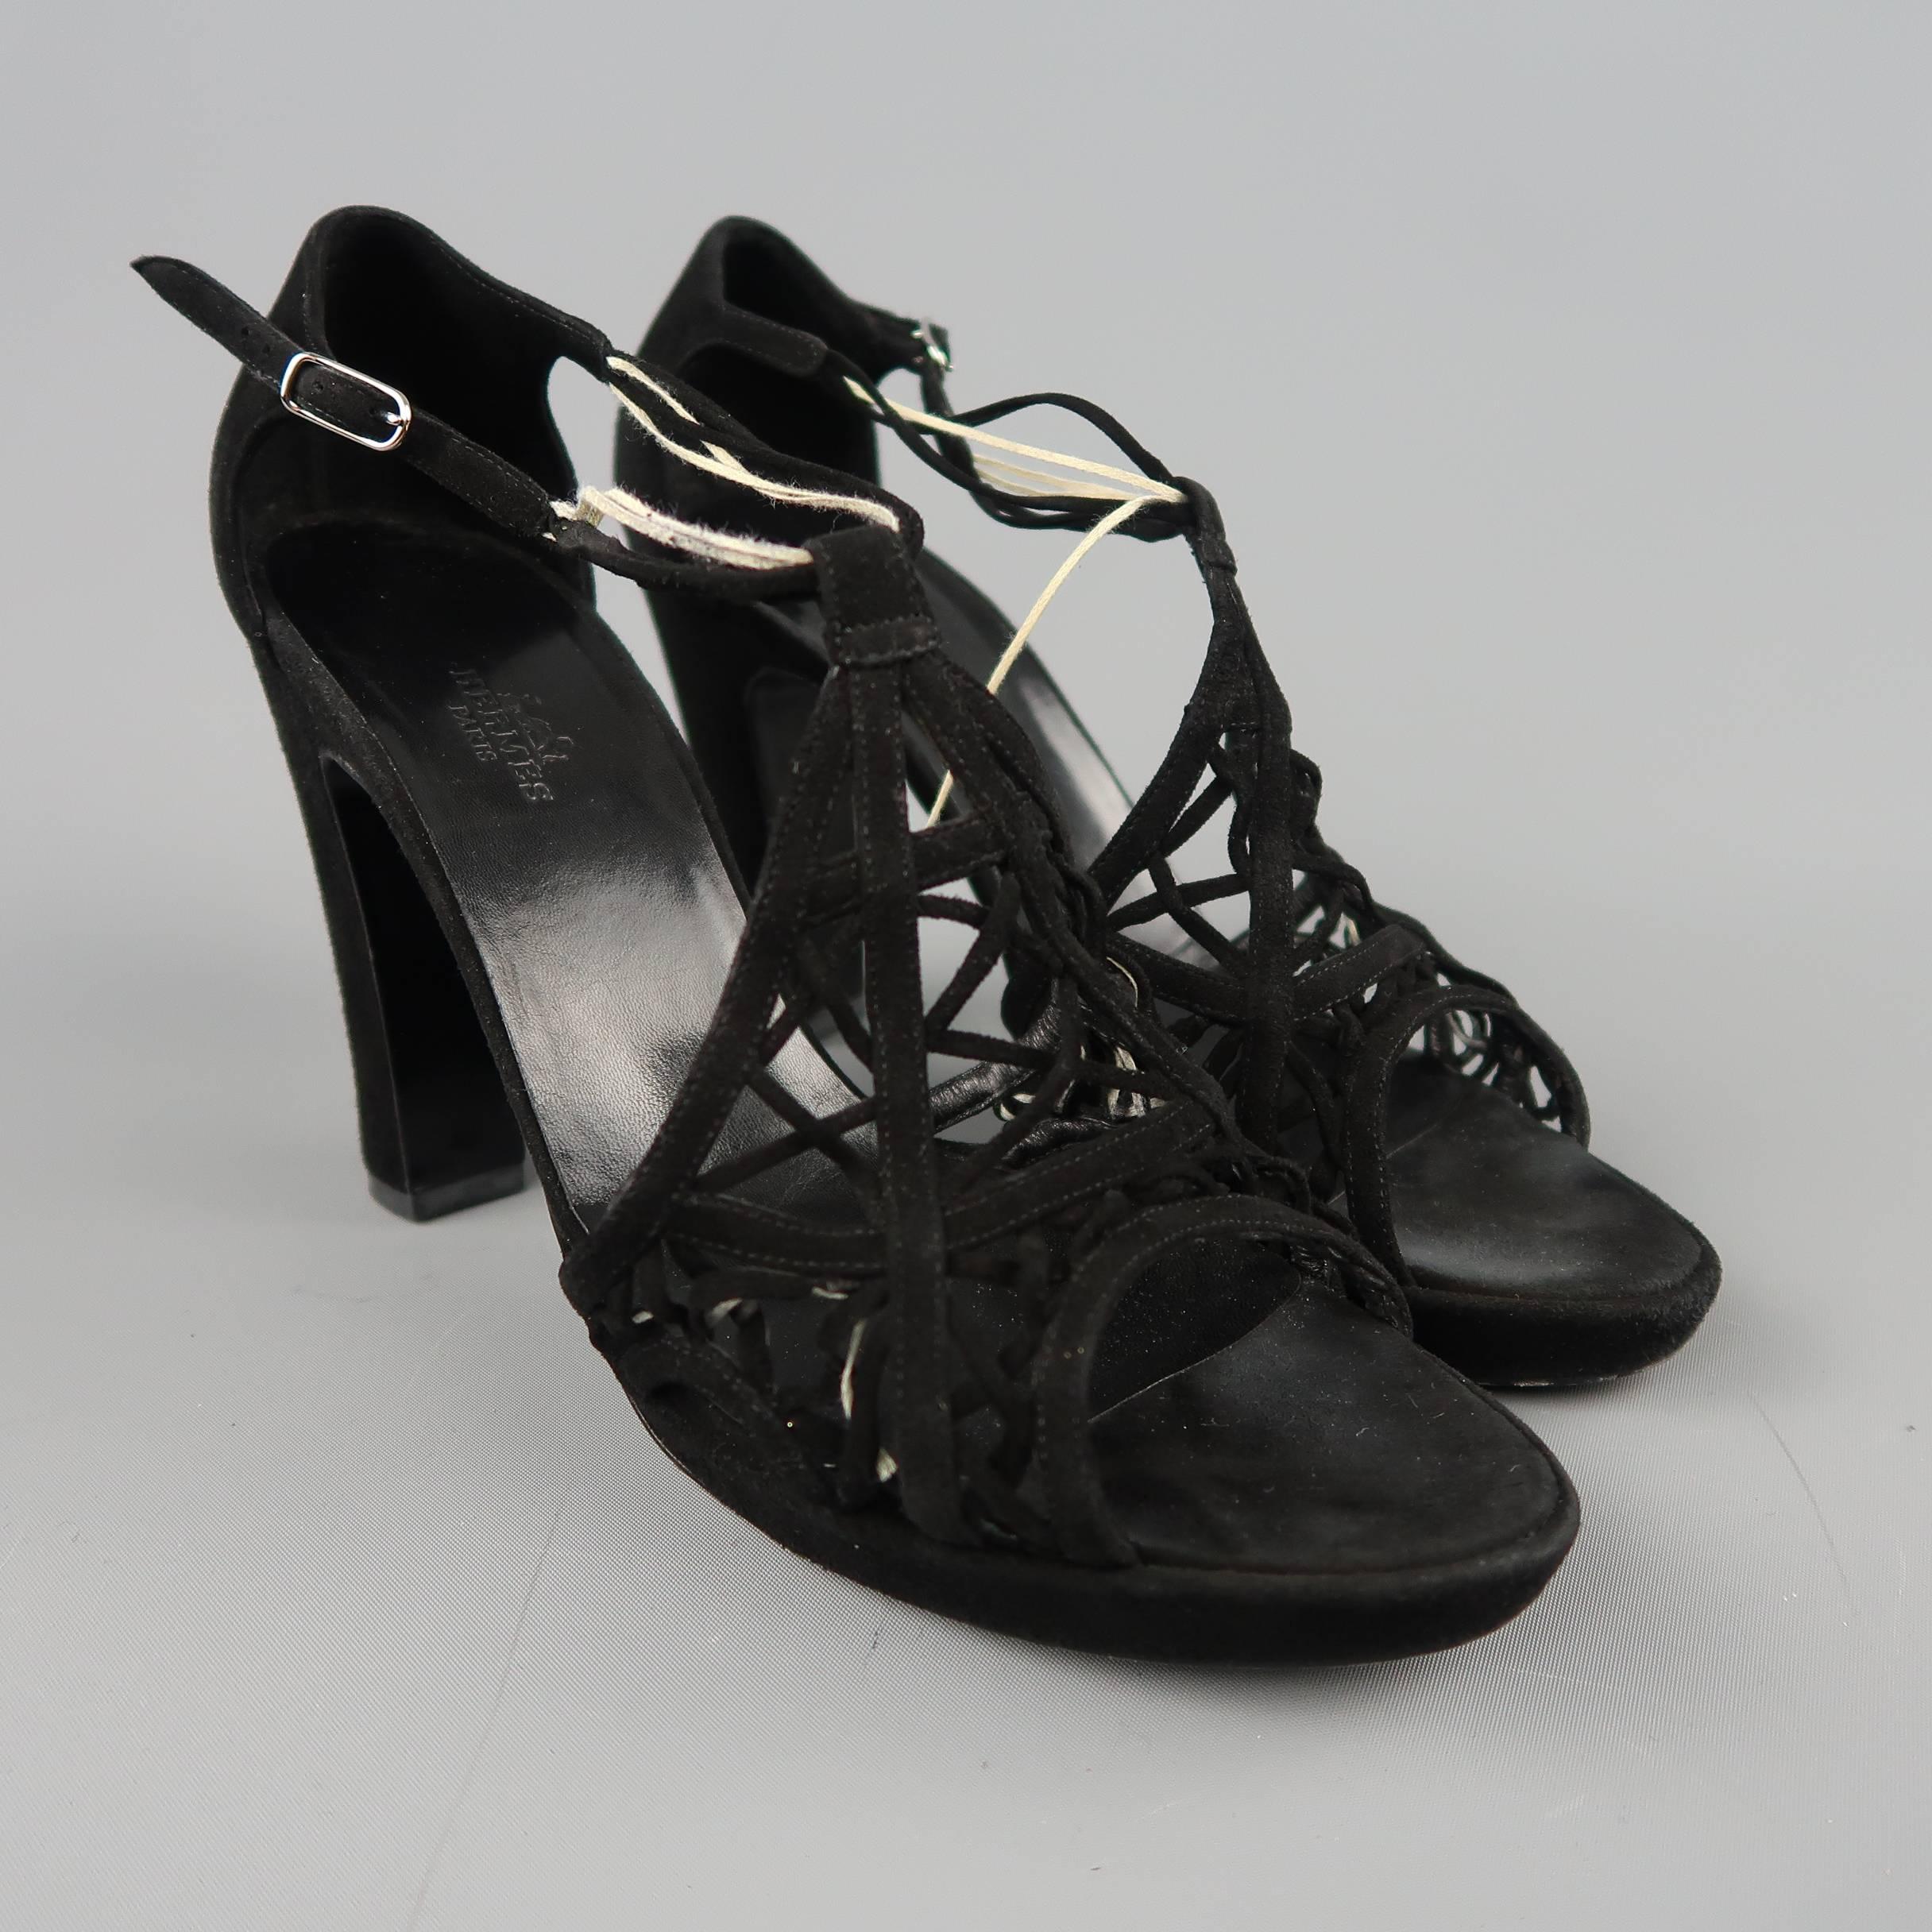 HERMES sandals come in black suede with an ornate woven front, ankle strap, and chunky heel. Wear throughout. As-is. Made in Italy.
 
Fair Pre-Owned Condition.
Marked: IT 40
 
Measurements:
 
Heel: 4.25 in.
Platform: 0.75 in.
